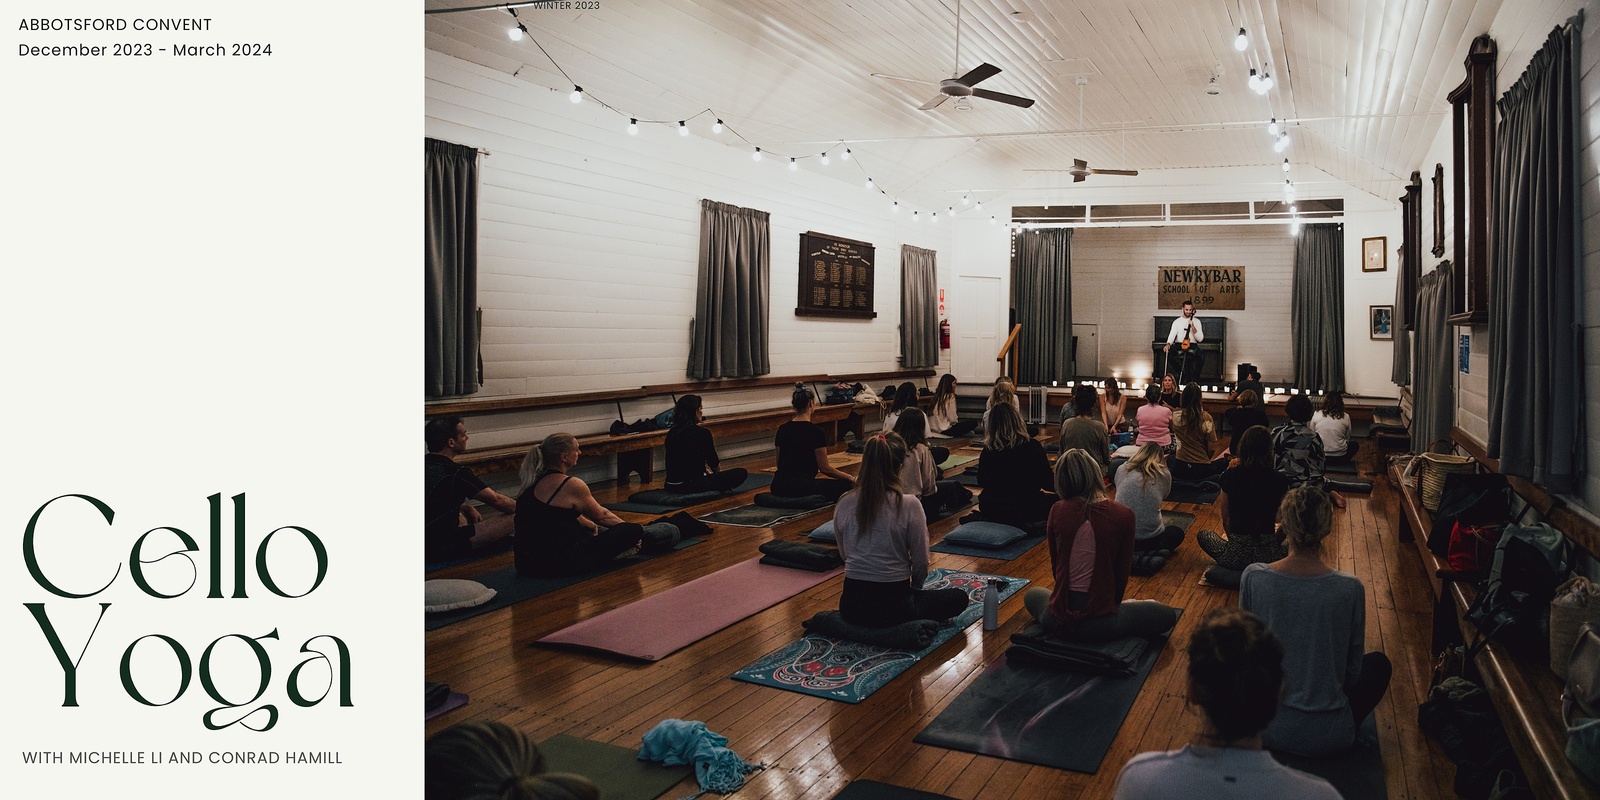 Live Cello Yoga at the Abbotsford Convent: An Invitation for Deep Inner ...